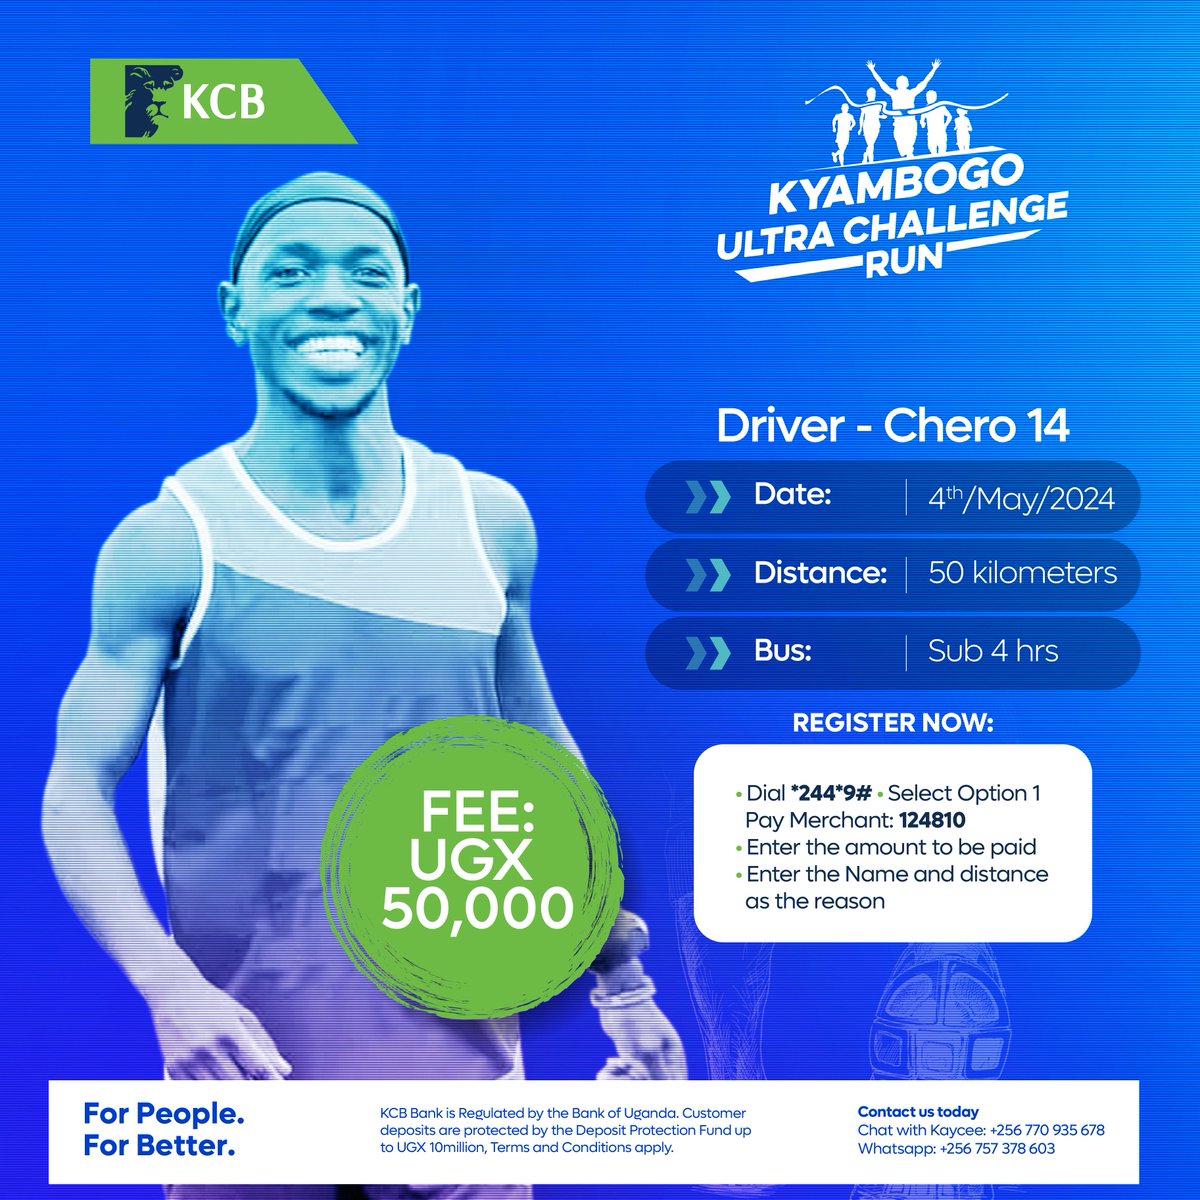 It's a fine Tuesday in UG, as we gear up for D-day, let's introduce your 50KM favorite bus drivers come 4th May! Sub 0⃣4⃣ Hours: @CHEROCollins, this humble soul like his elite running cousins from Sebei region means business when on the trail. Collins will lead our wolf pack.1/3